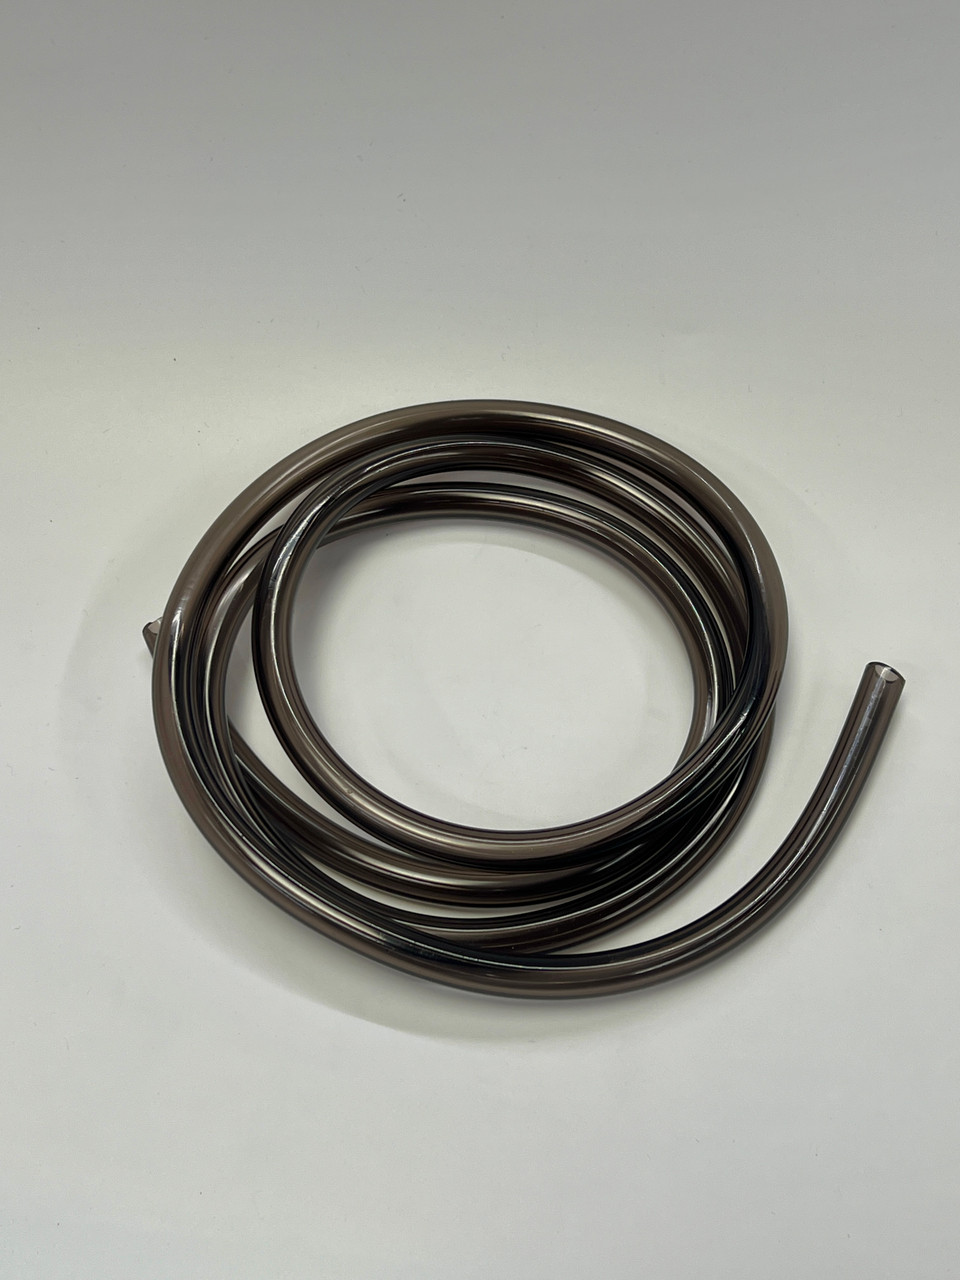 Nic Woods Made in the USA Extra Thick Fuel Line * 5 FT * Black